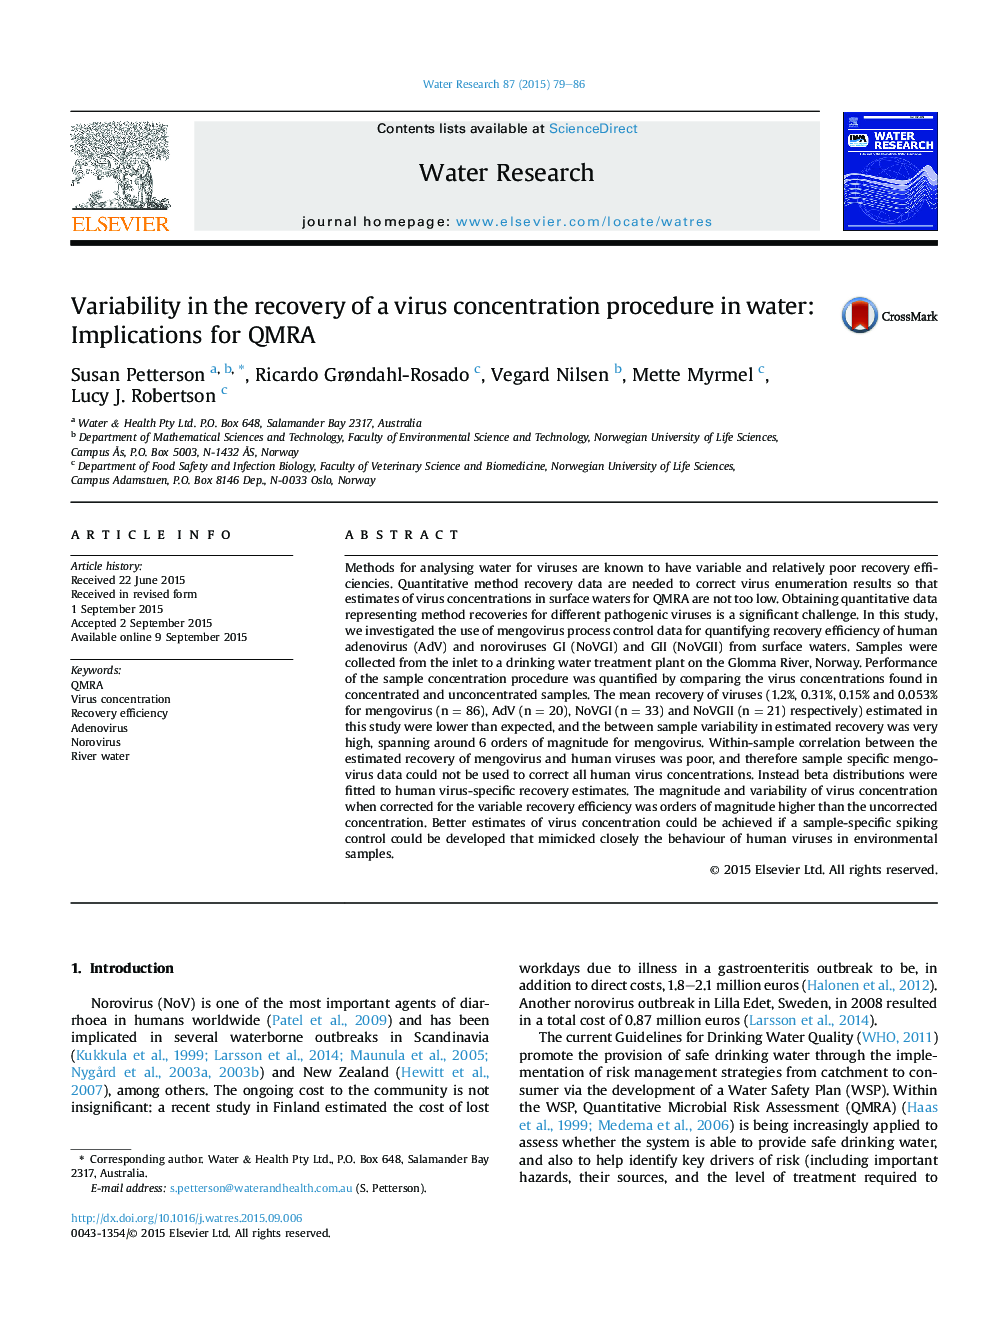 Variability in the recovery of a virus concentration procedure in water: Implications for QMRA